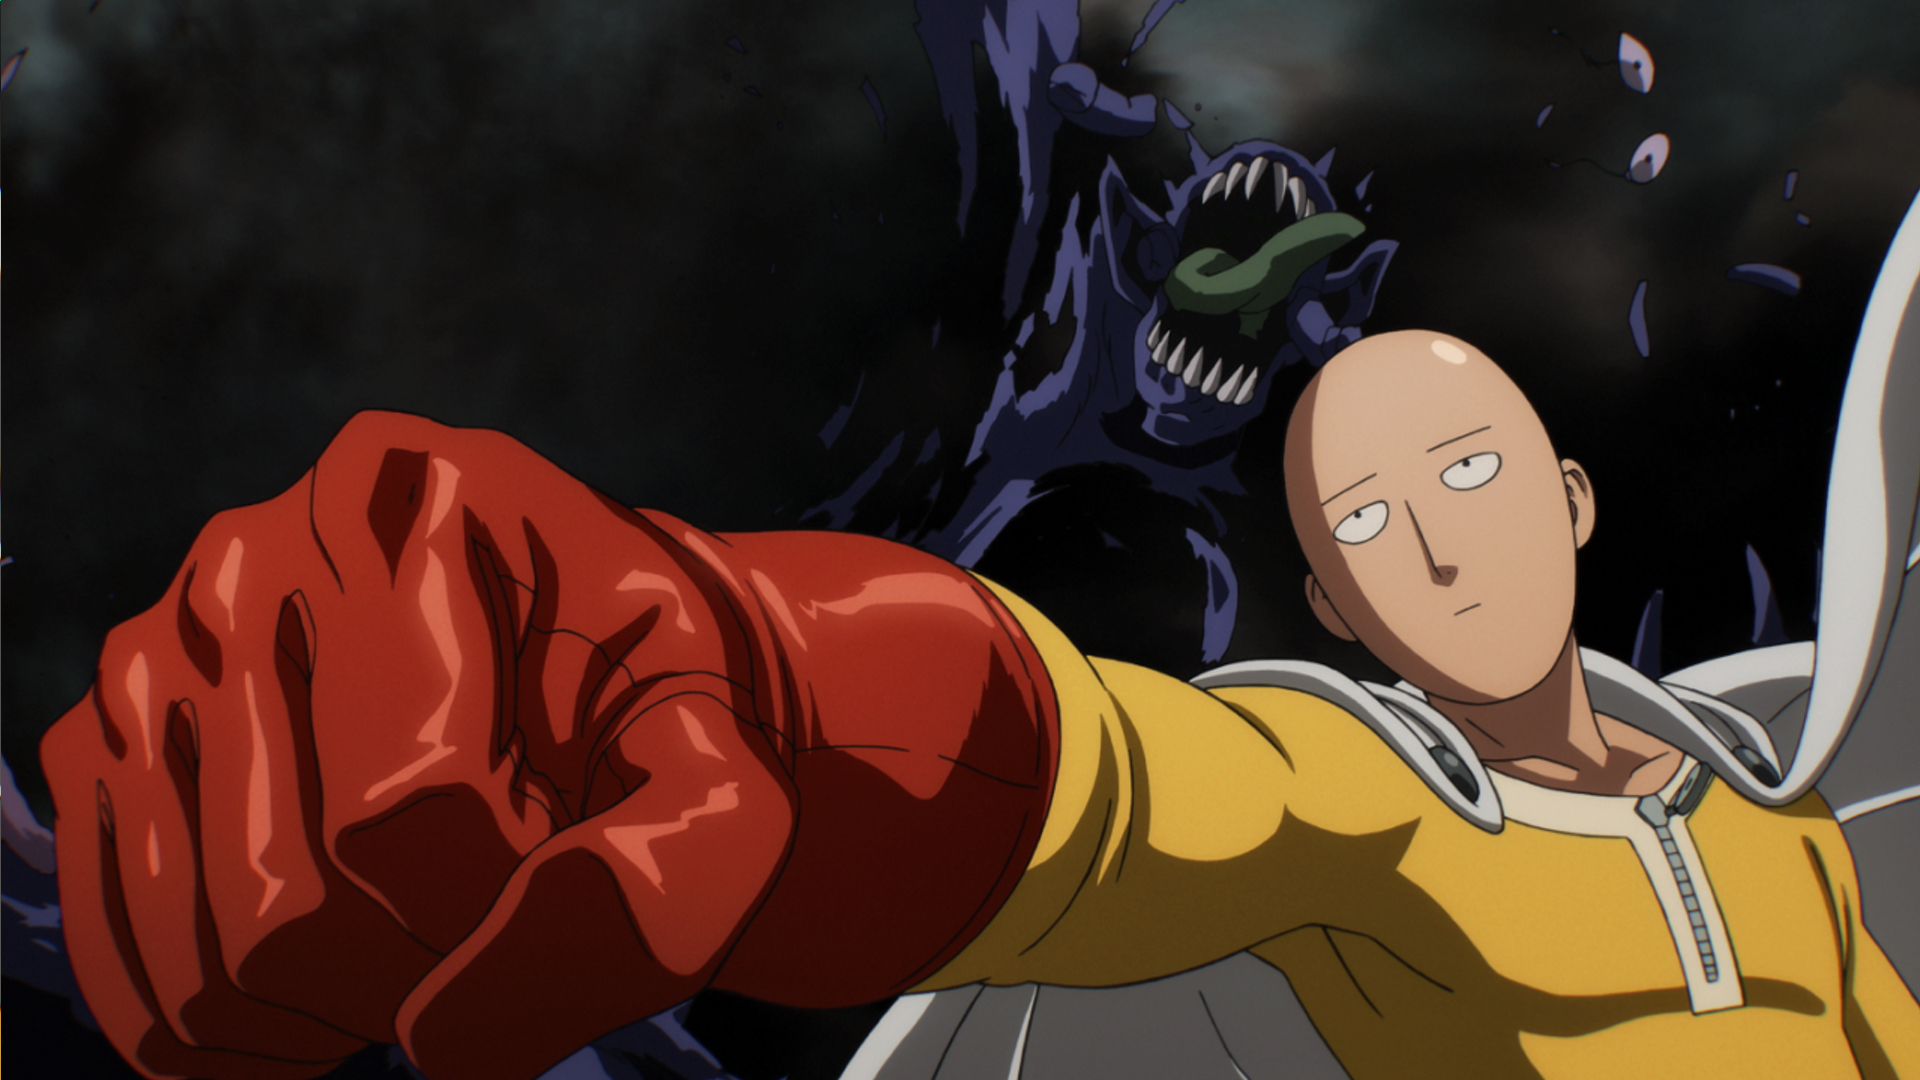 One Punch Man S2 - OP, The One Punch Man Season Two OP is 🔥🔥🔥🔥, By  Funimation